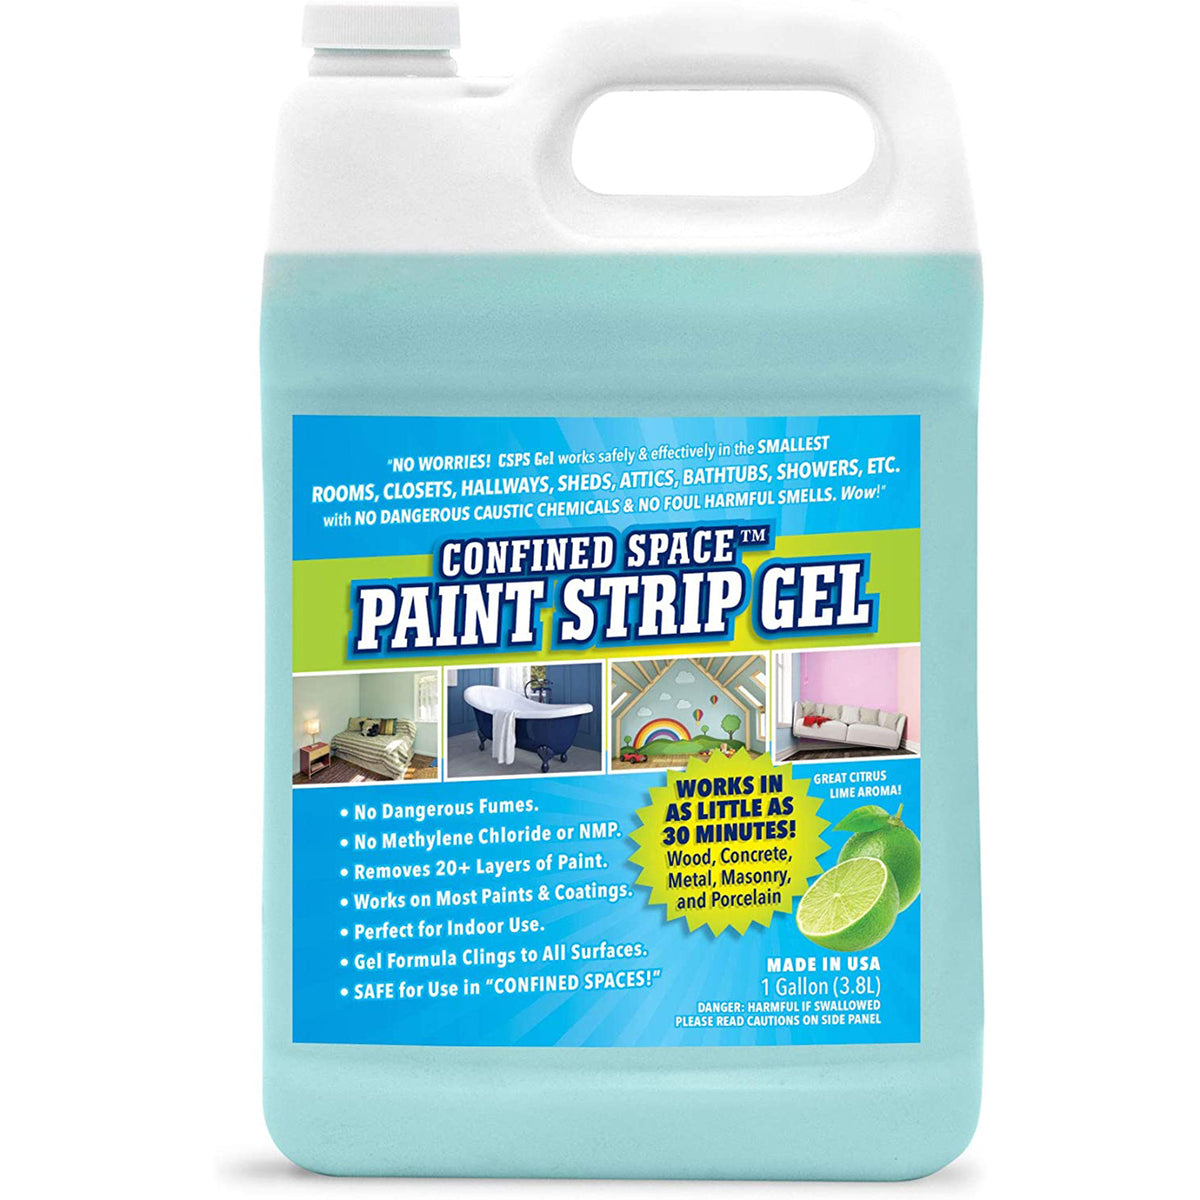 Environmentally friendly paint stripping on metal surfaces using